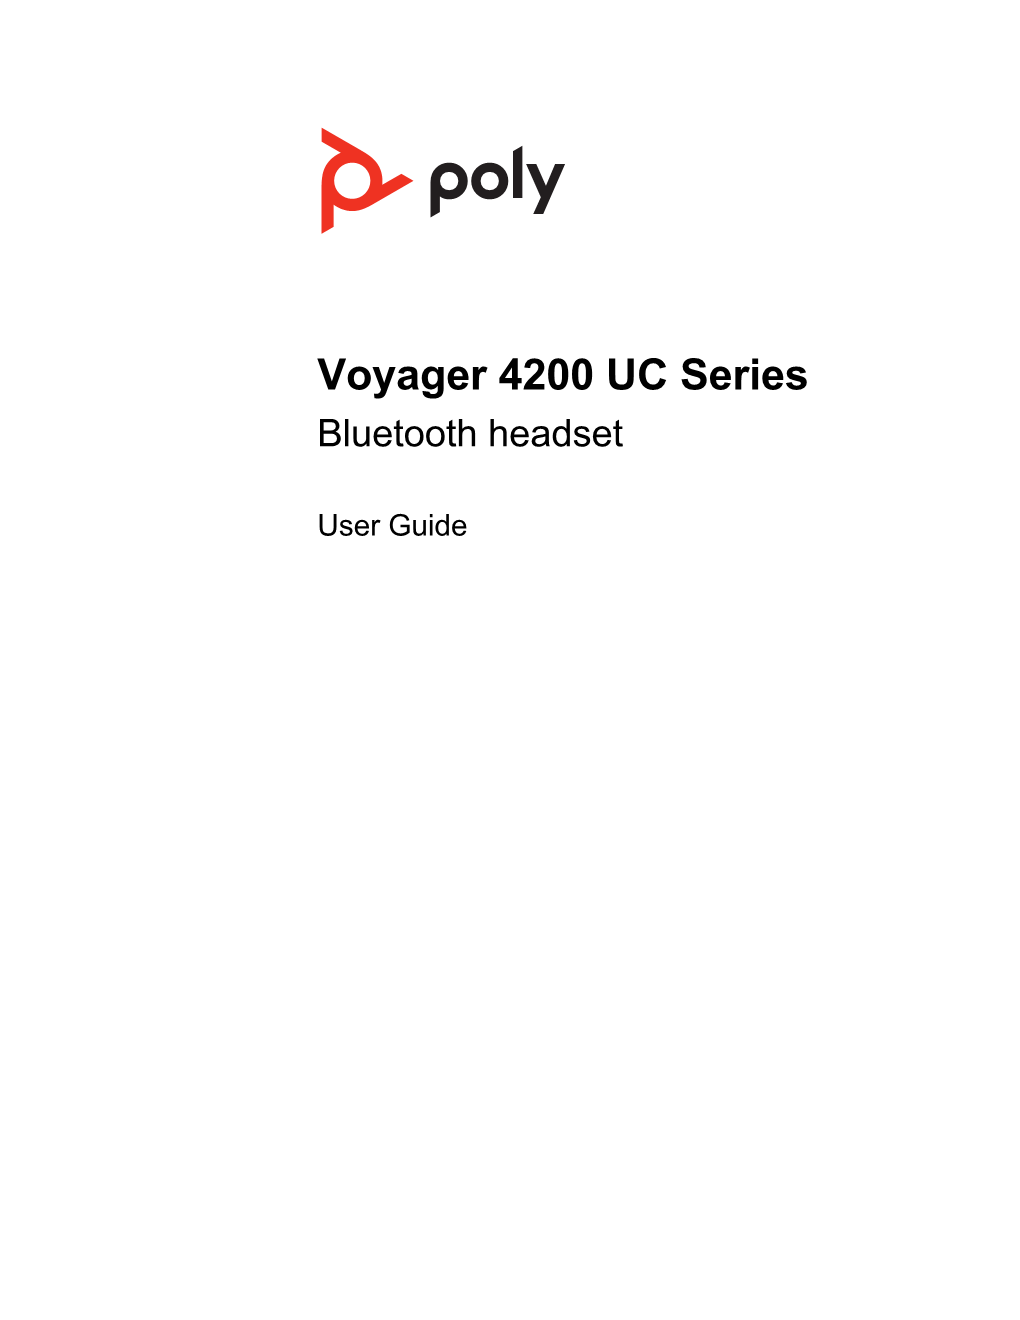 Poly Voyager 4200 UC Series User Guide